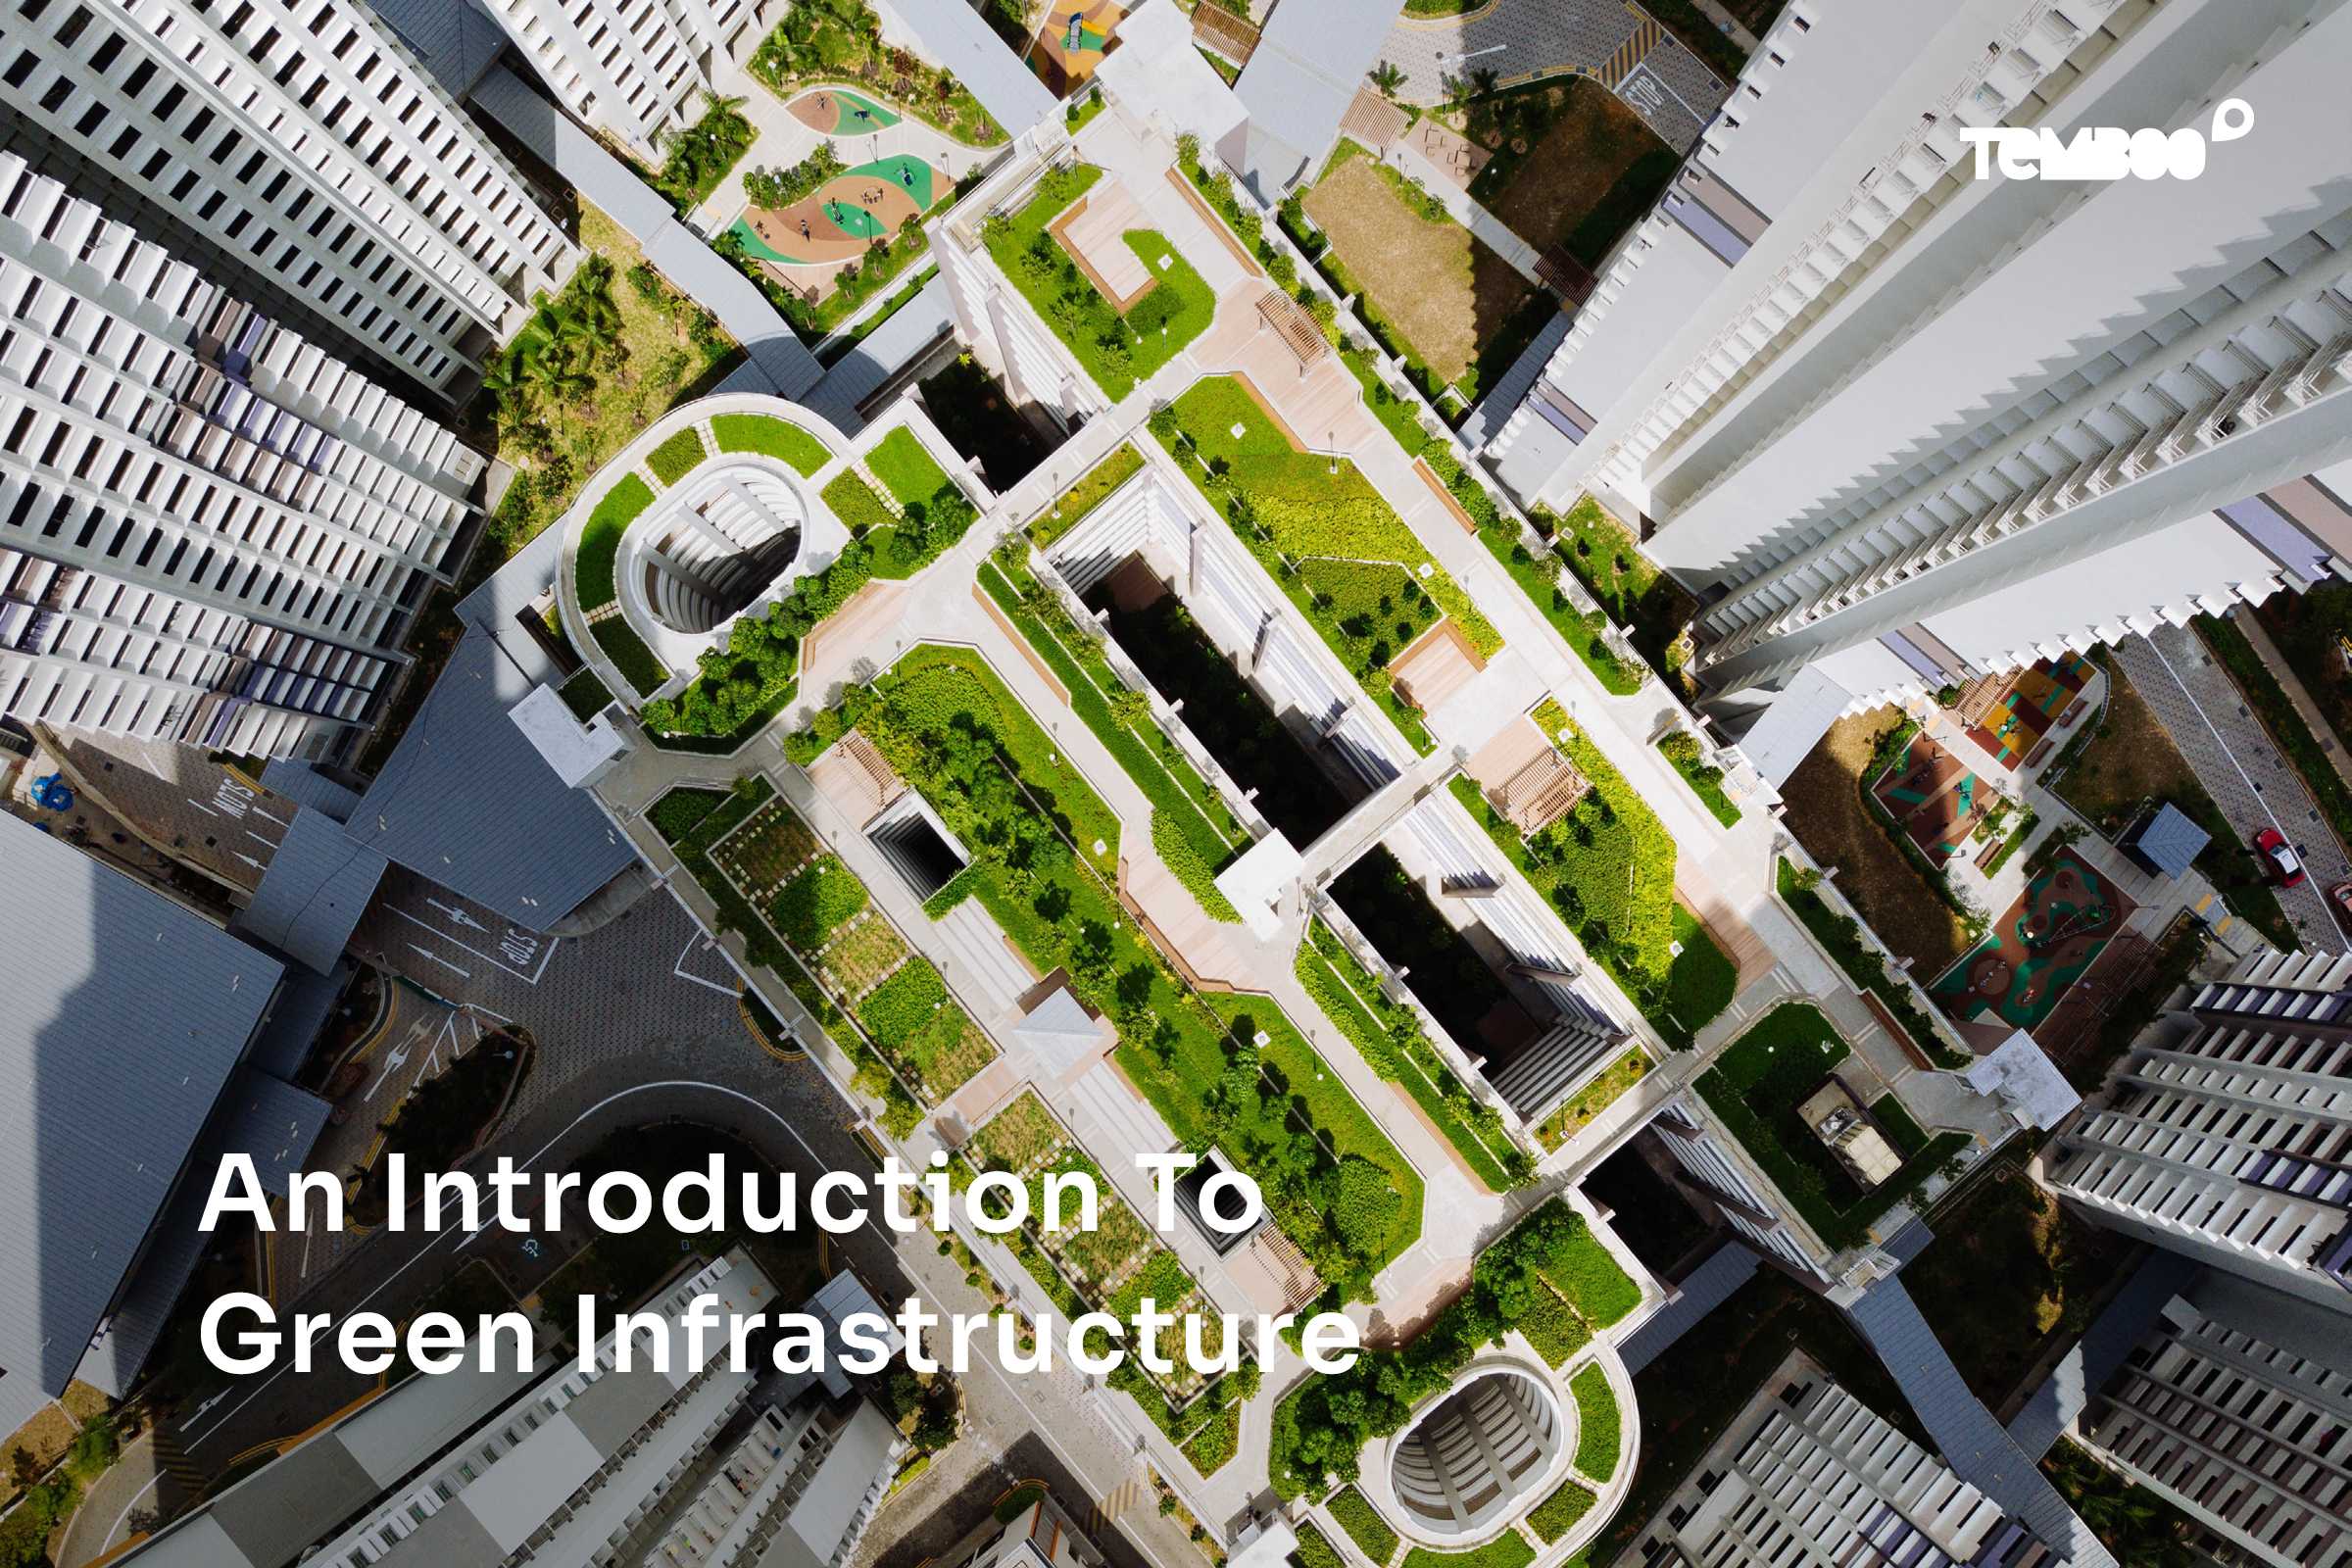 An Introduction to Green Infrastructure